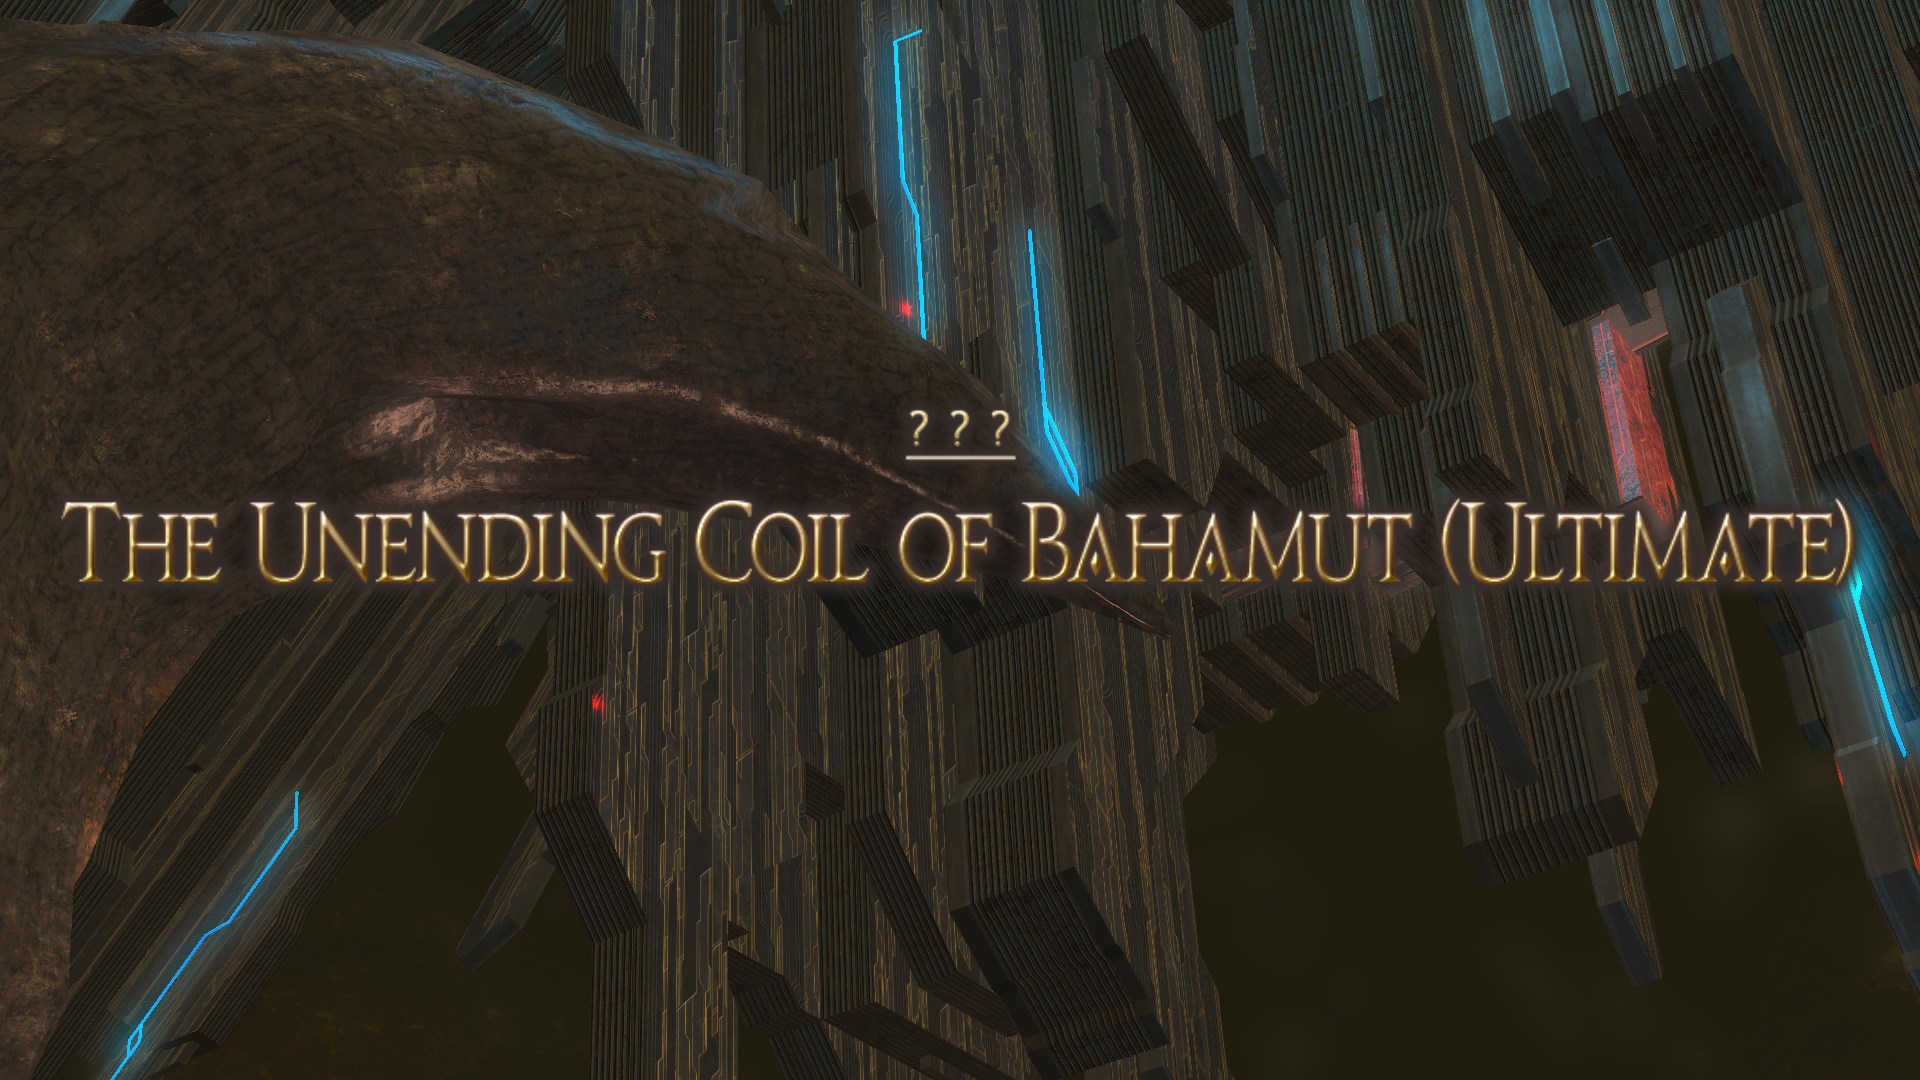 The Unending Coil of Bahamut (Ultimate)